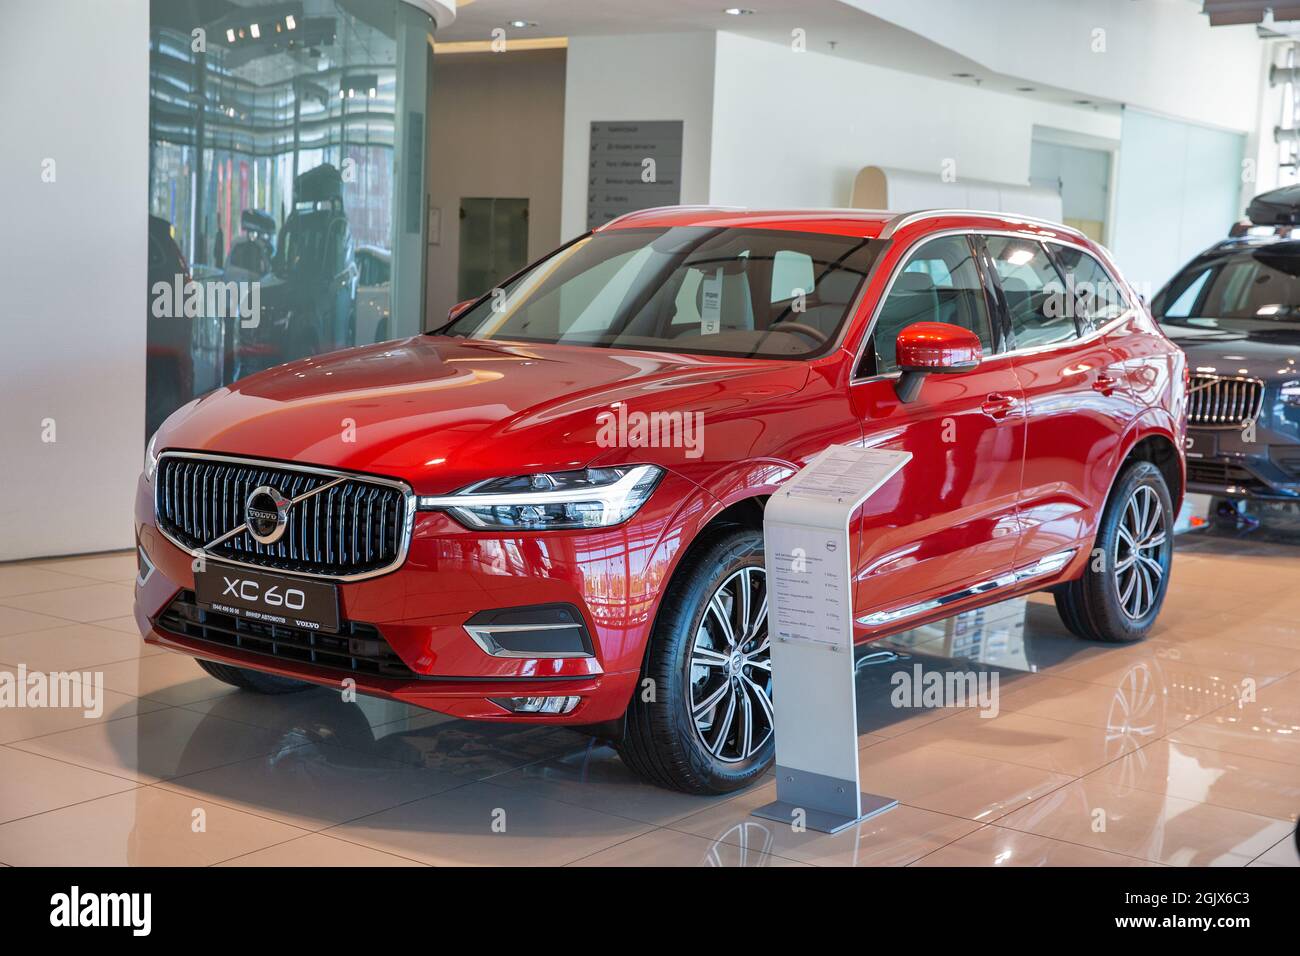 KYIV, UKRAINE - MAY 10, 2021: New XC60 SUV car indoors on display in Volvo Center dealership company. The Volvo Group is a Swedish multinational manuf Stock Photo